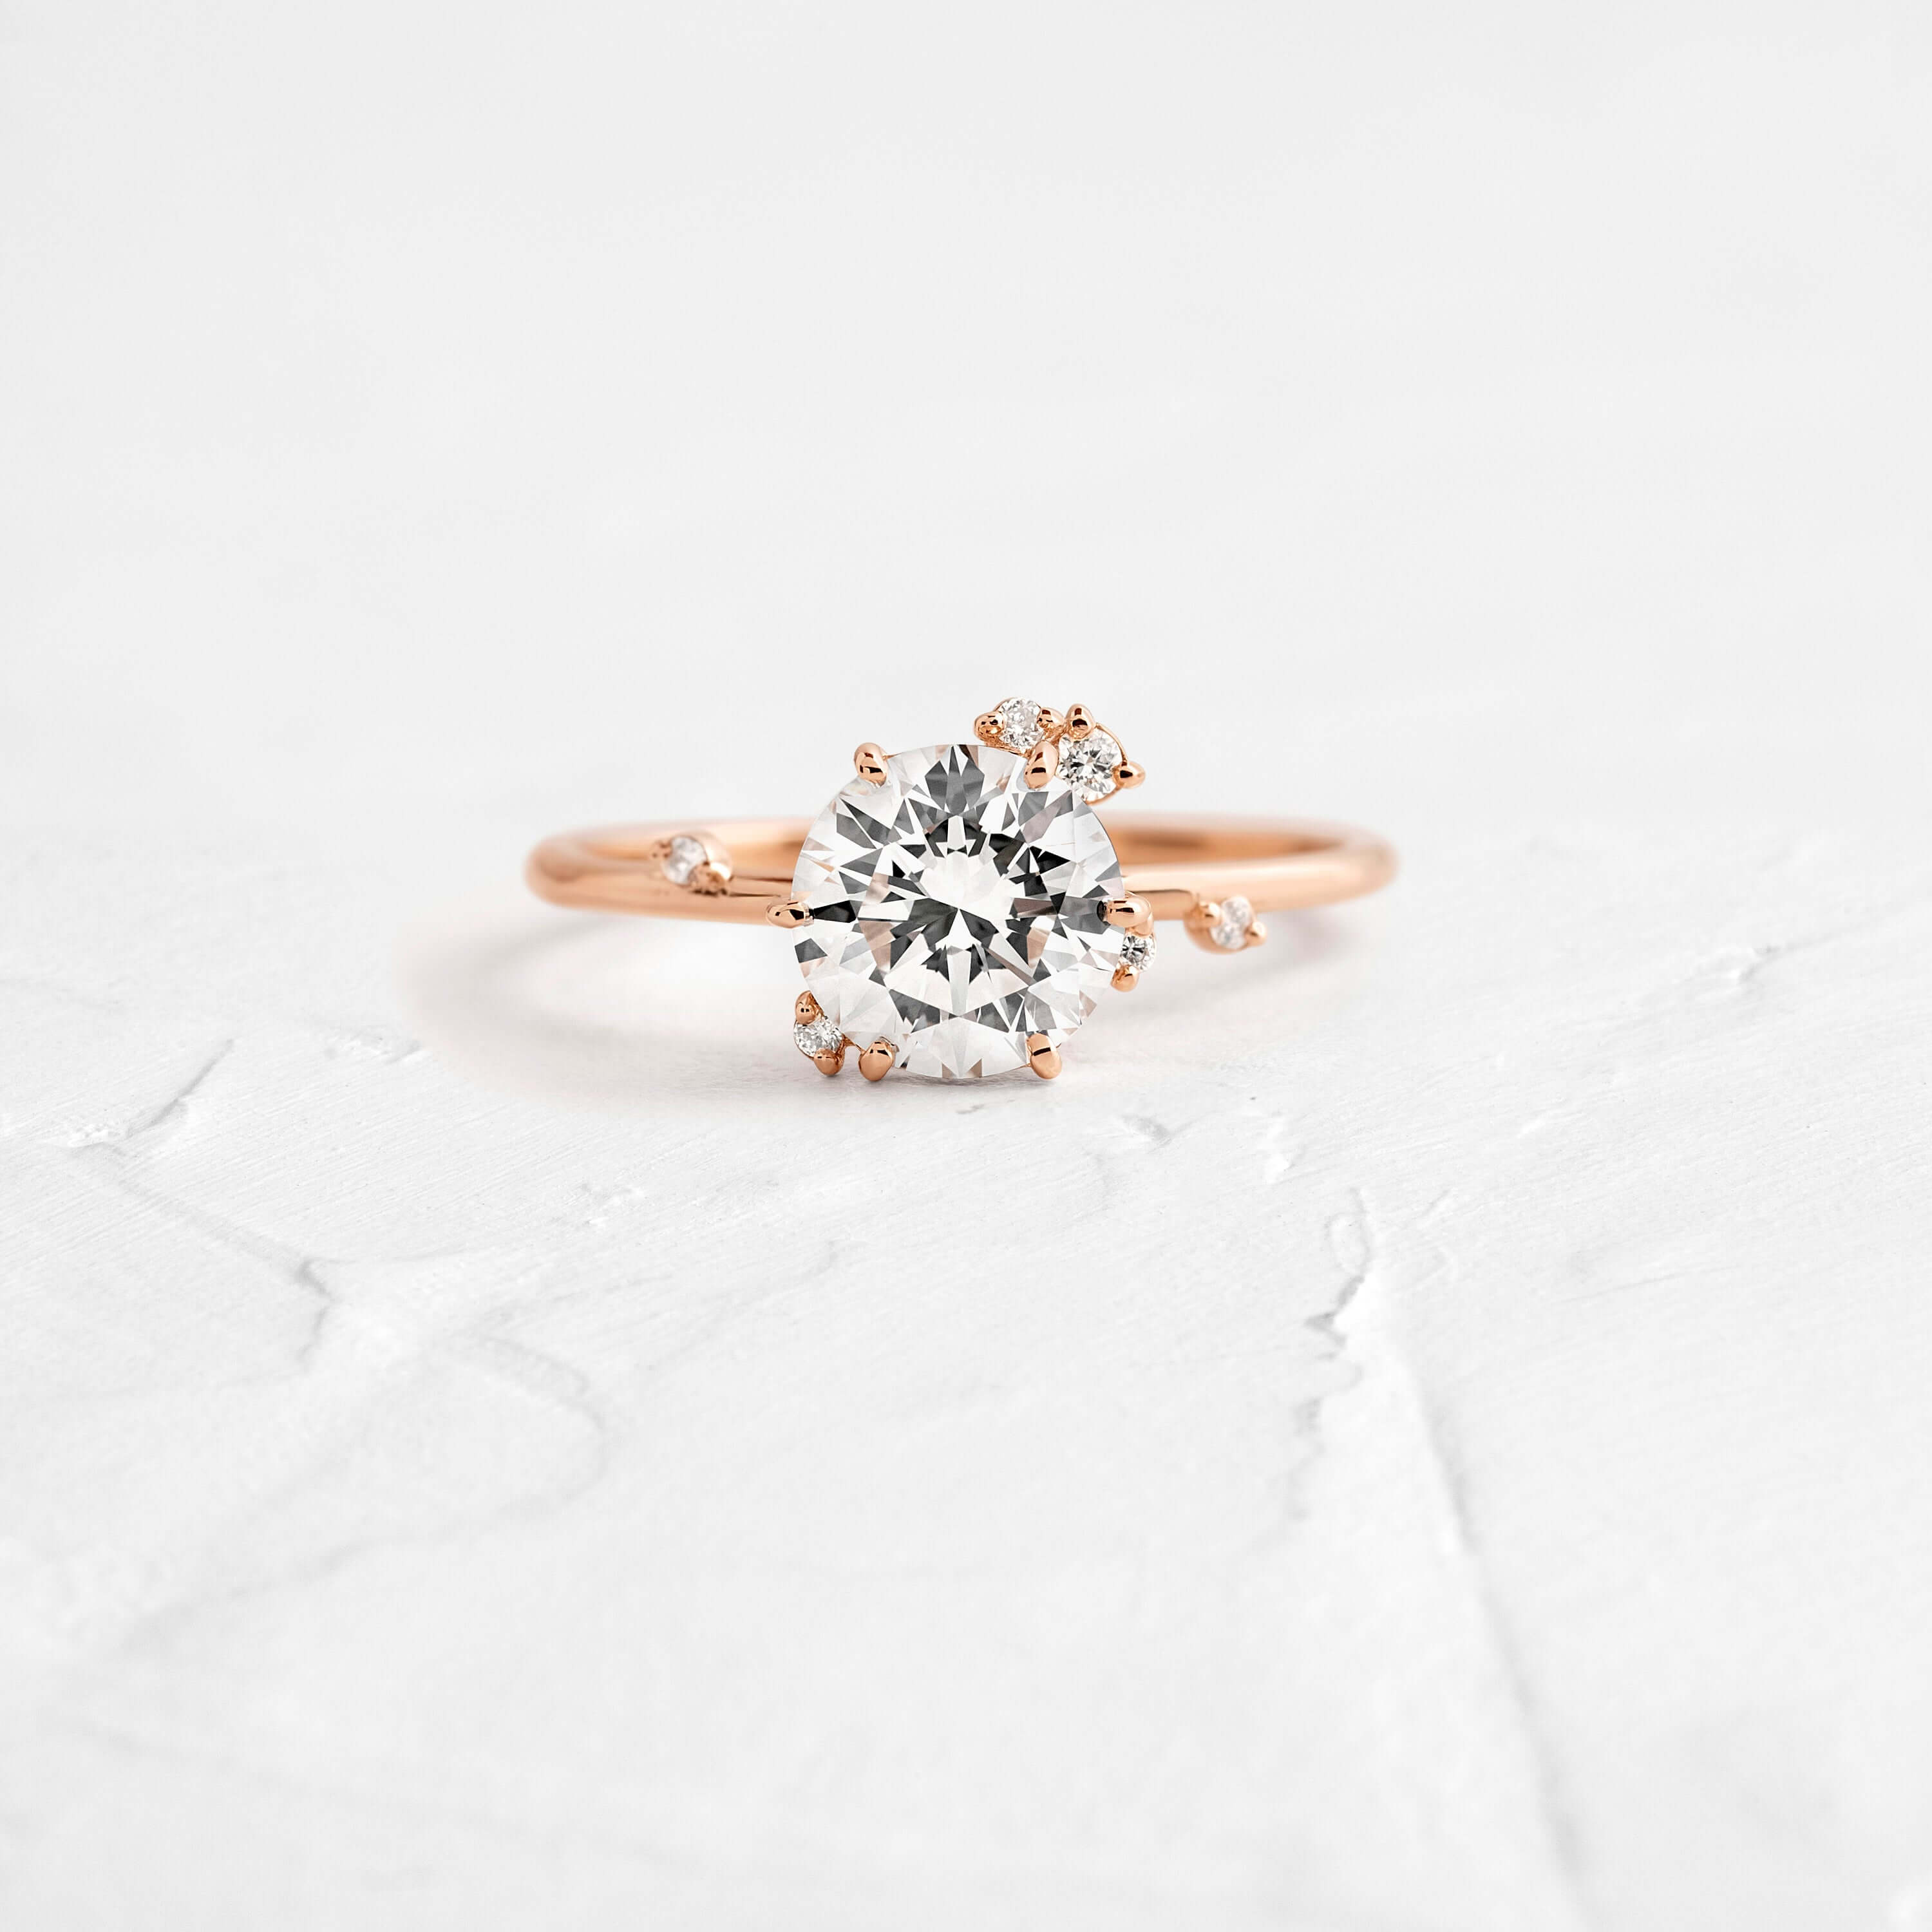 To A Flame Ring, Round | Melanie Casey Fine Jewelry